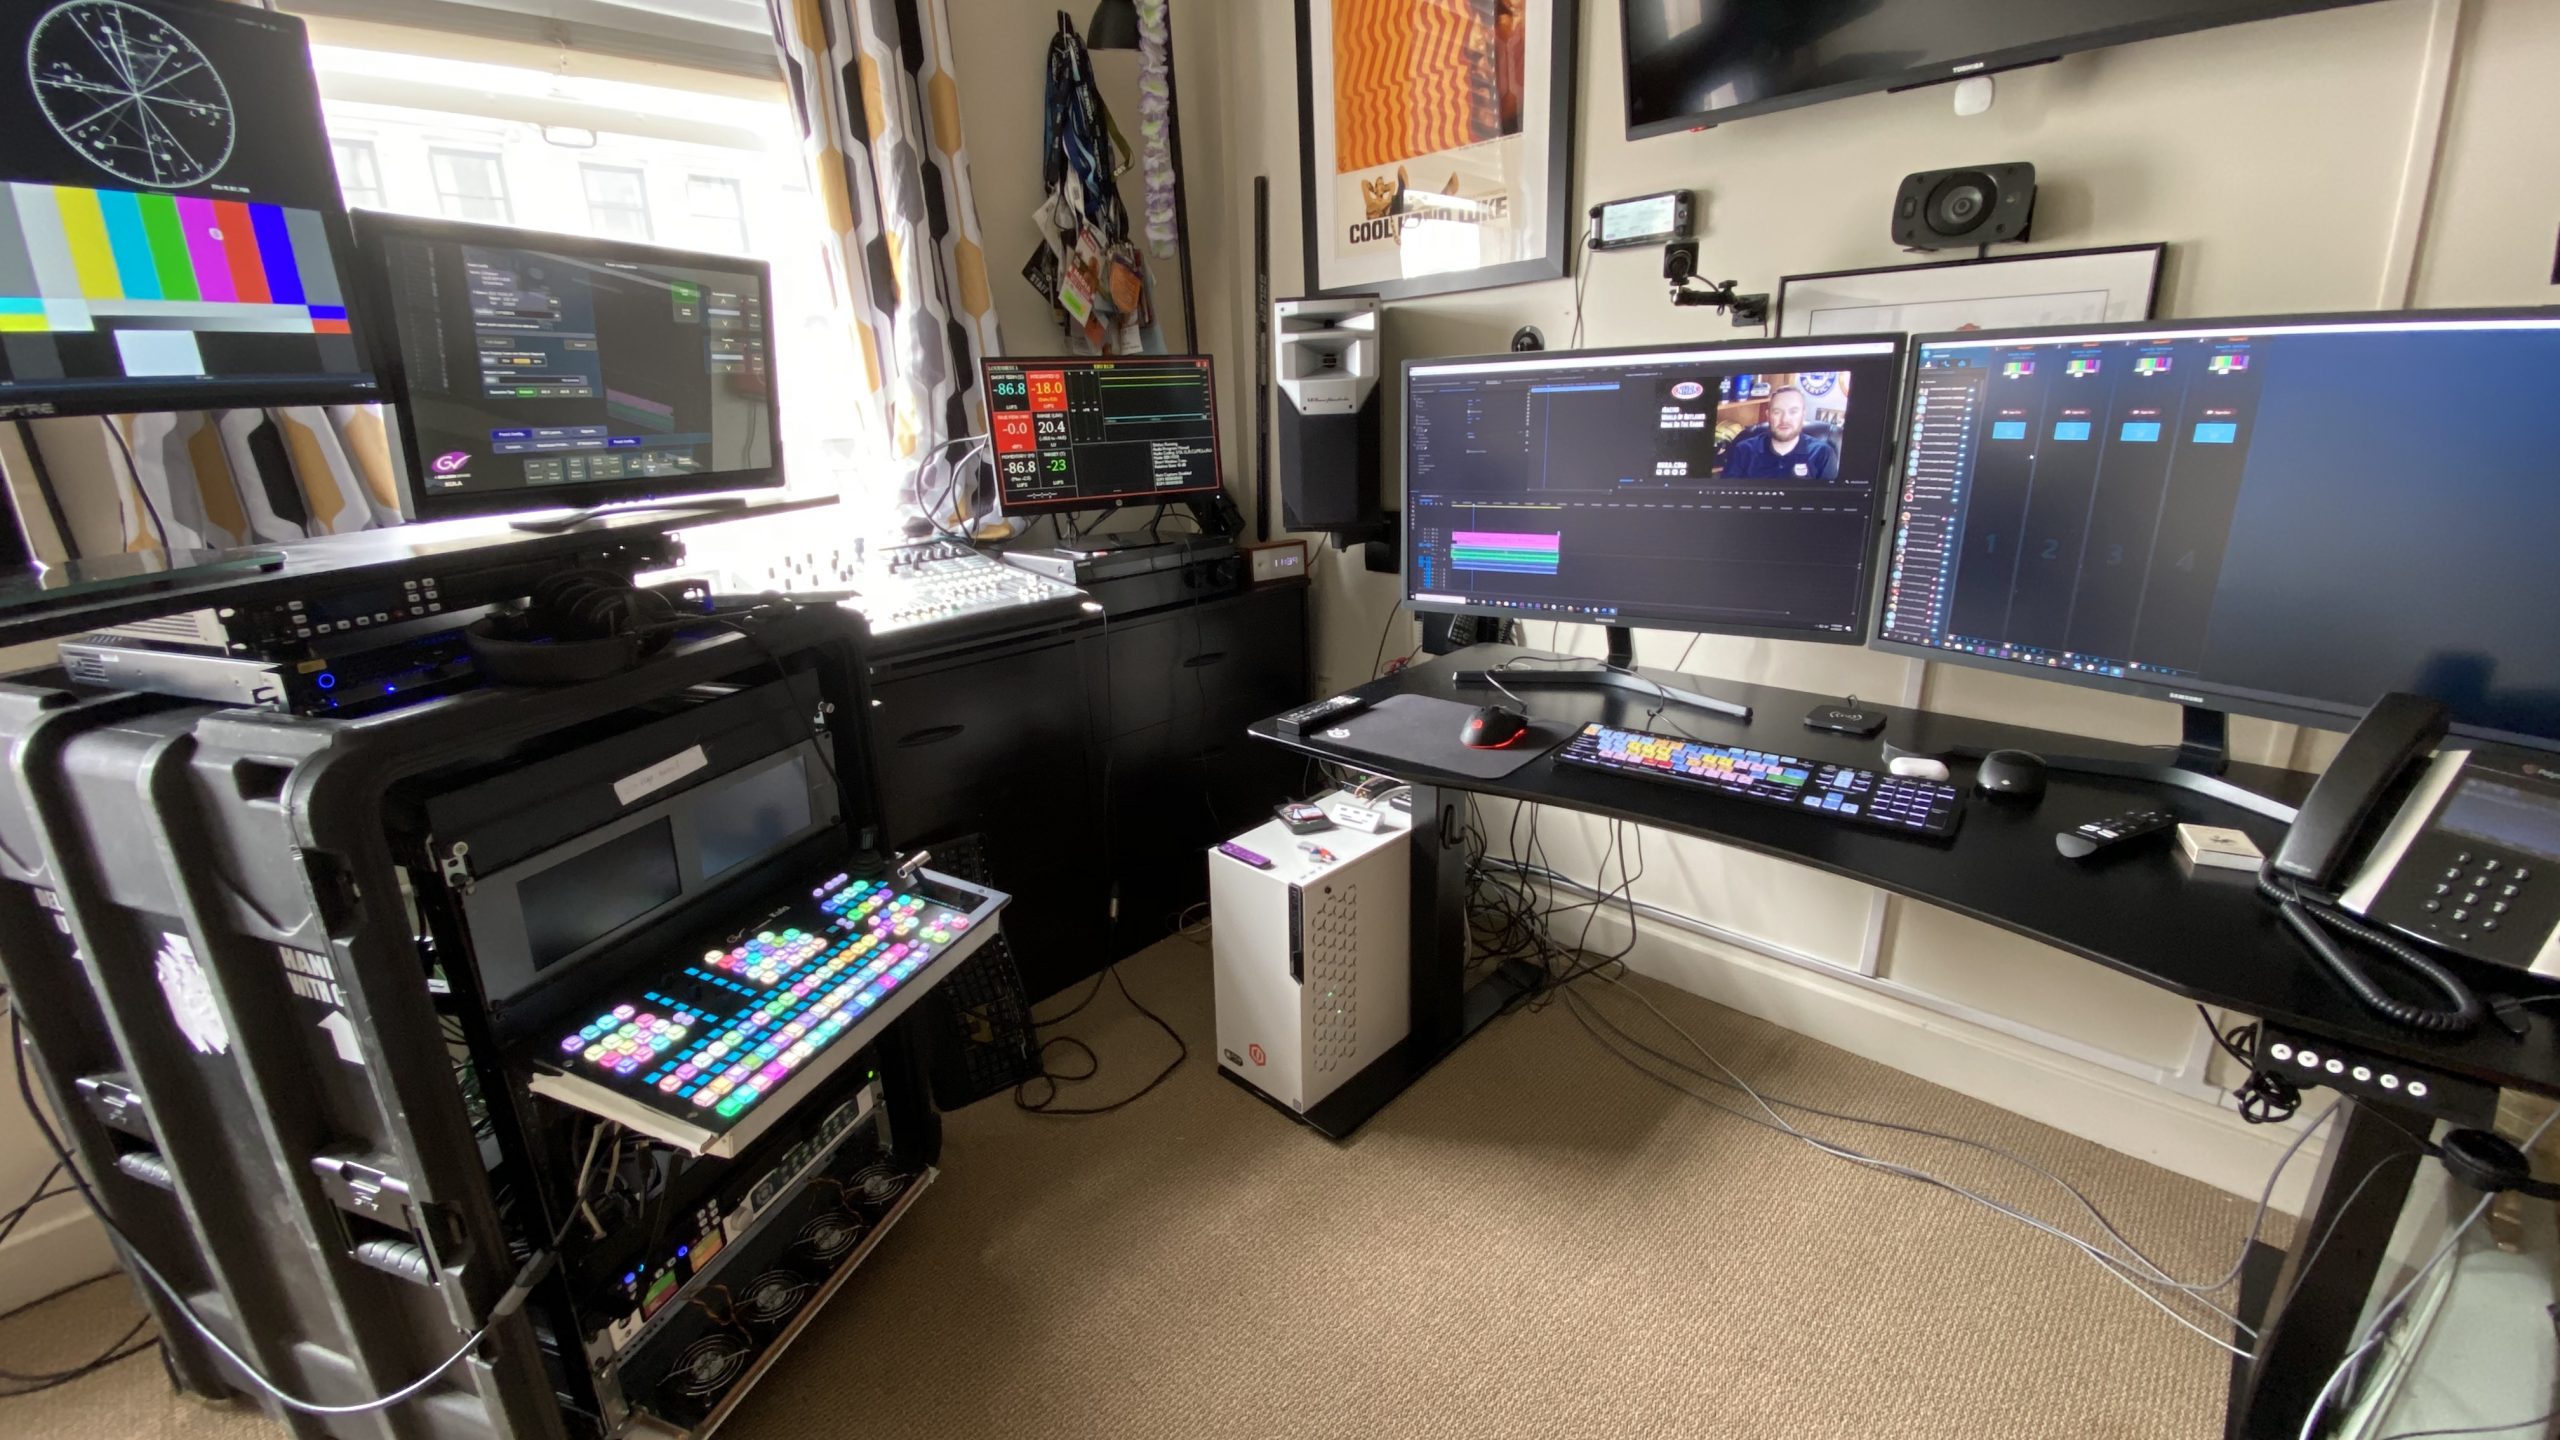 NHRA Lives in the Cloud for At-Home Editing, Production of Racing Content